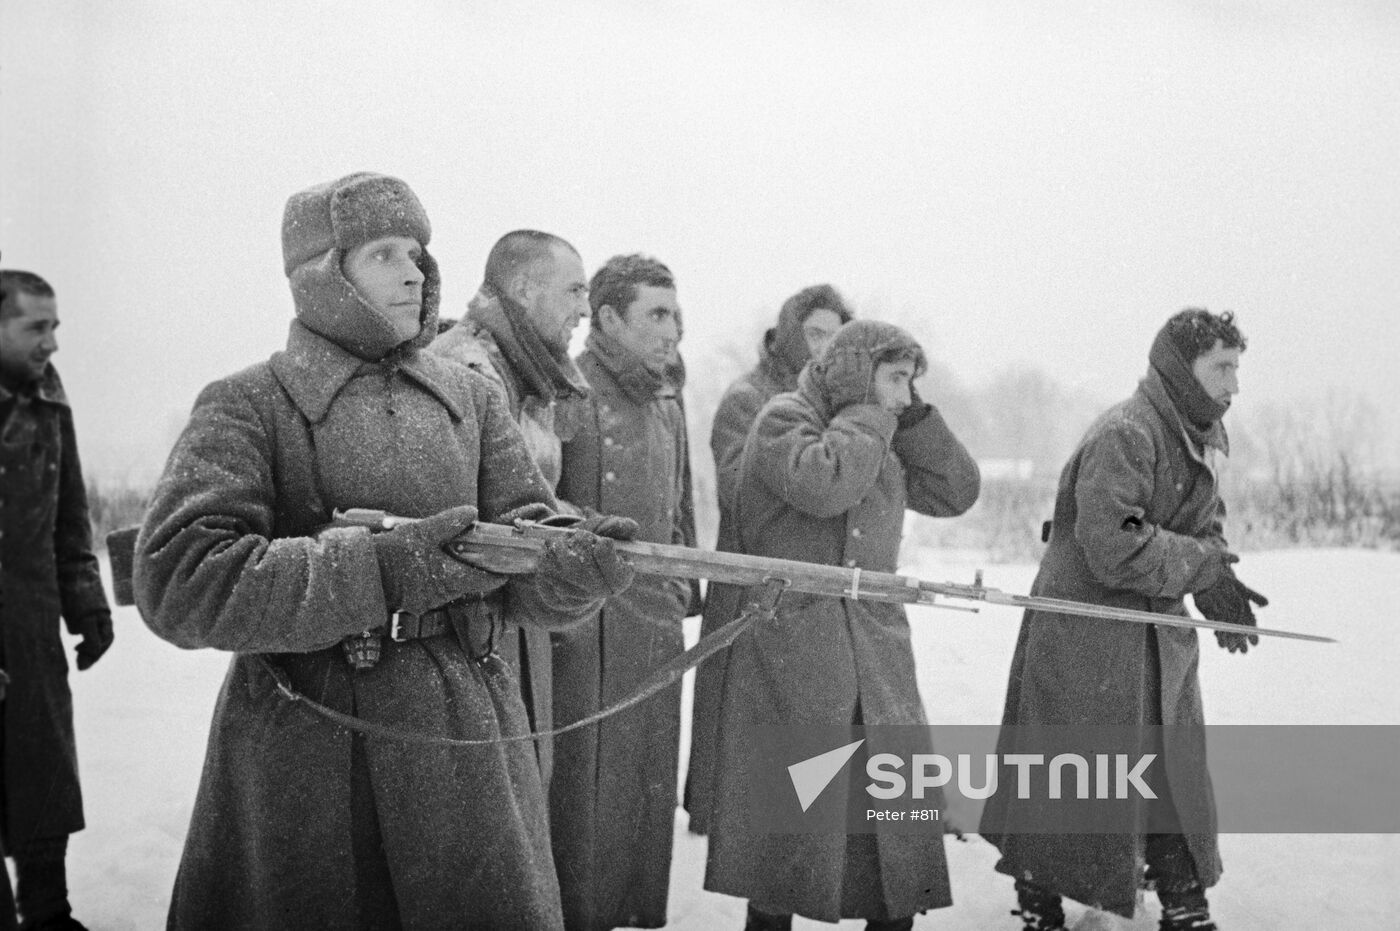 PRISONERS RED ARMY SOLDIER WINTER